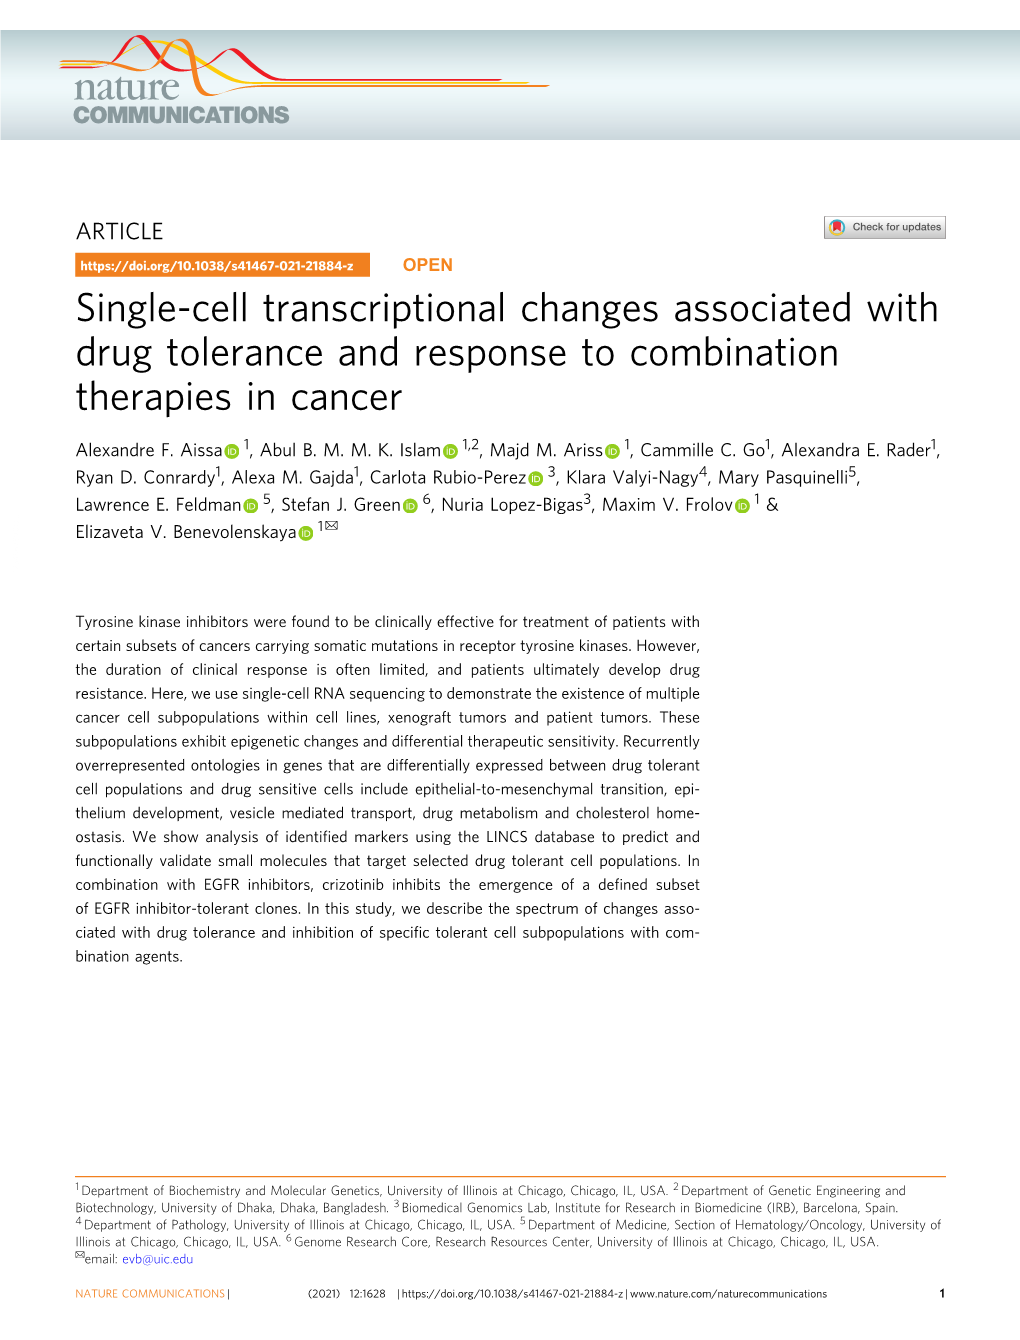 Single-Cell Transcriptional Changes Associated with Drug Tolerance and Response to Combination Therapies in Cancer